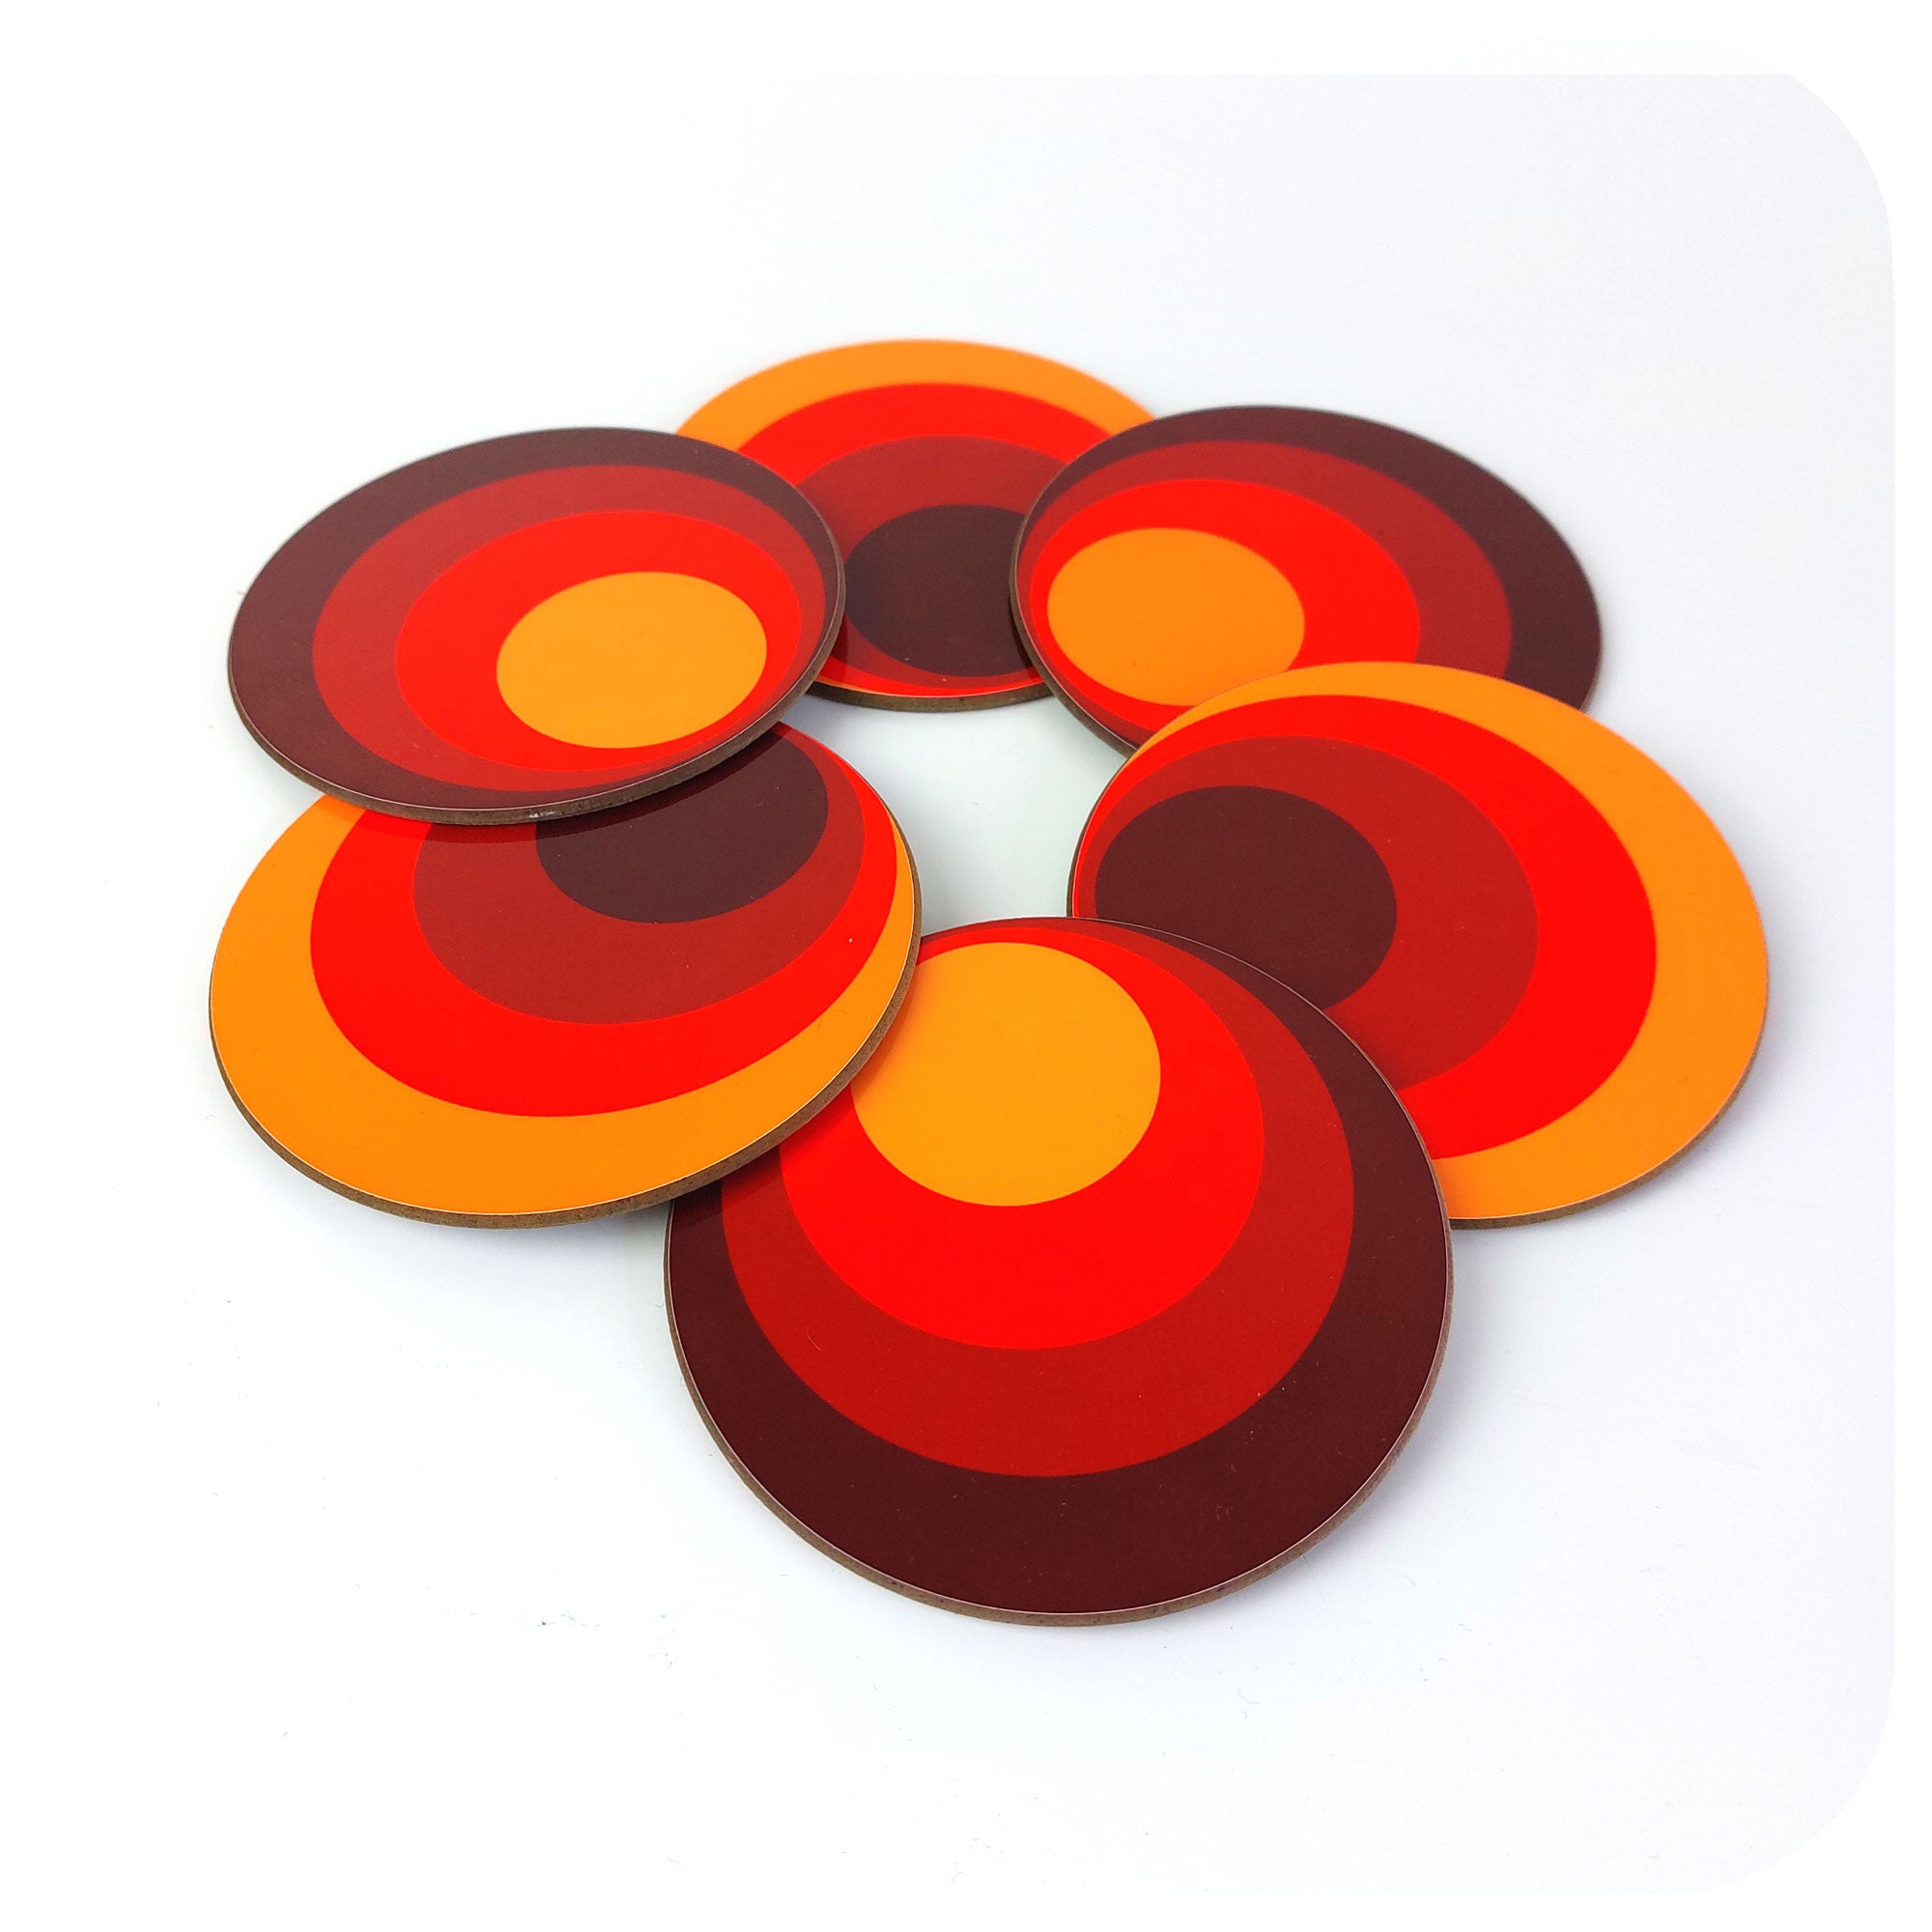 Set of Six Round 70s style coasters on a white background | The Inkabilly Emporium